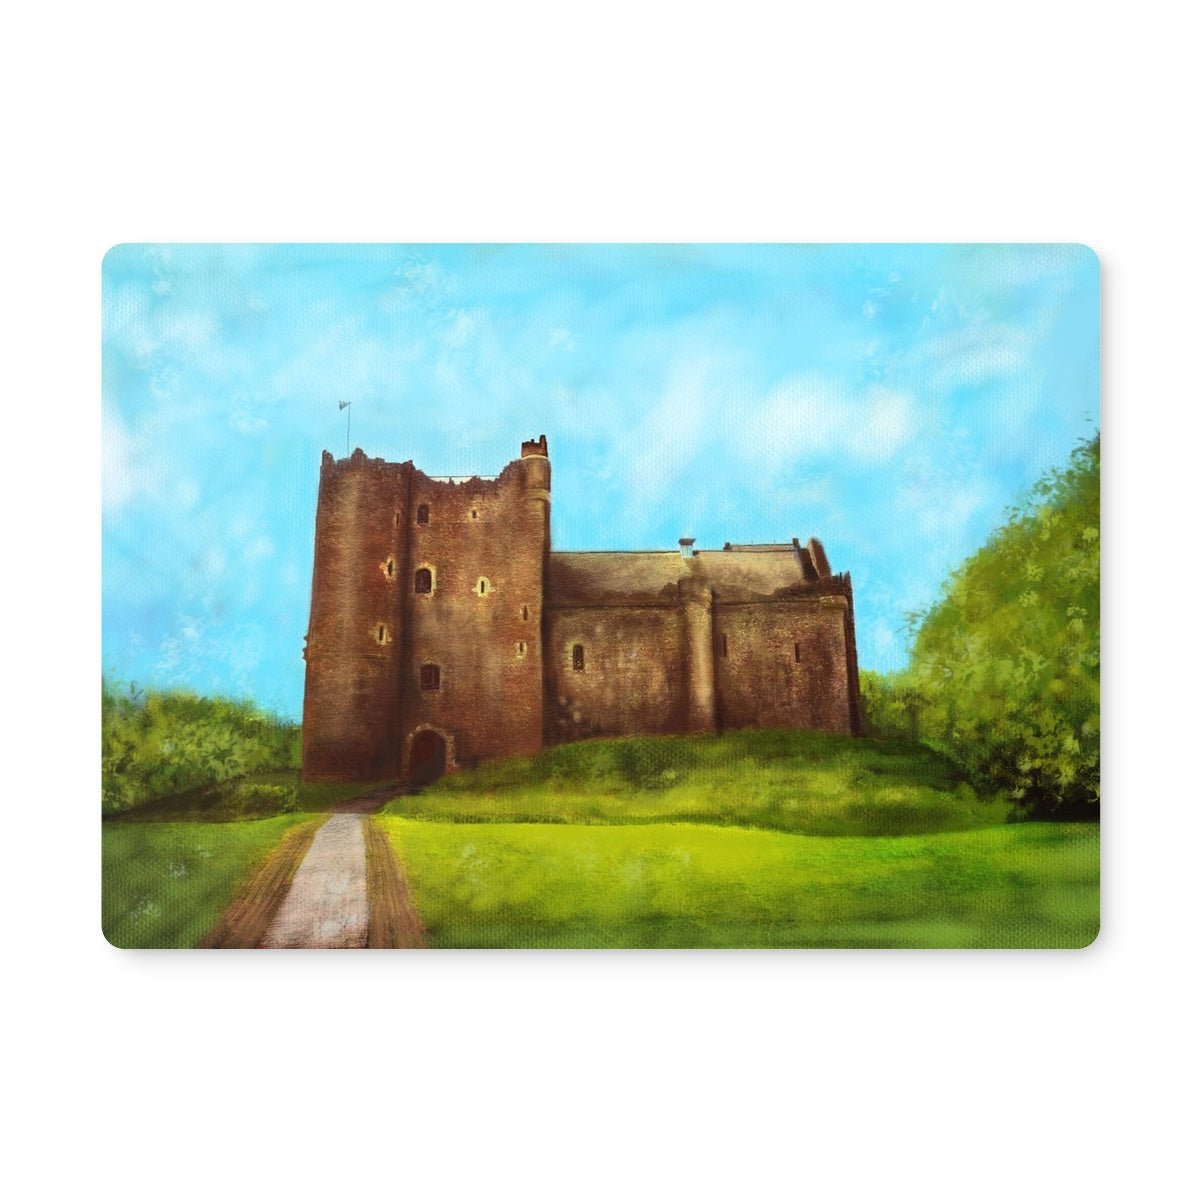 Doune Castle Art Gifts Placemat-Placemats-Scottish Castles Art Gallery-Single Placemat-Paintings, Prints, Homeware, Art Gifts From Scotland By Scottish Artist Kevin Hunter